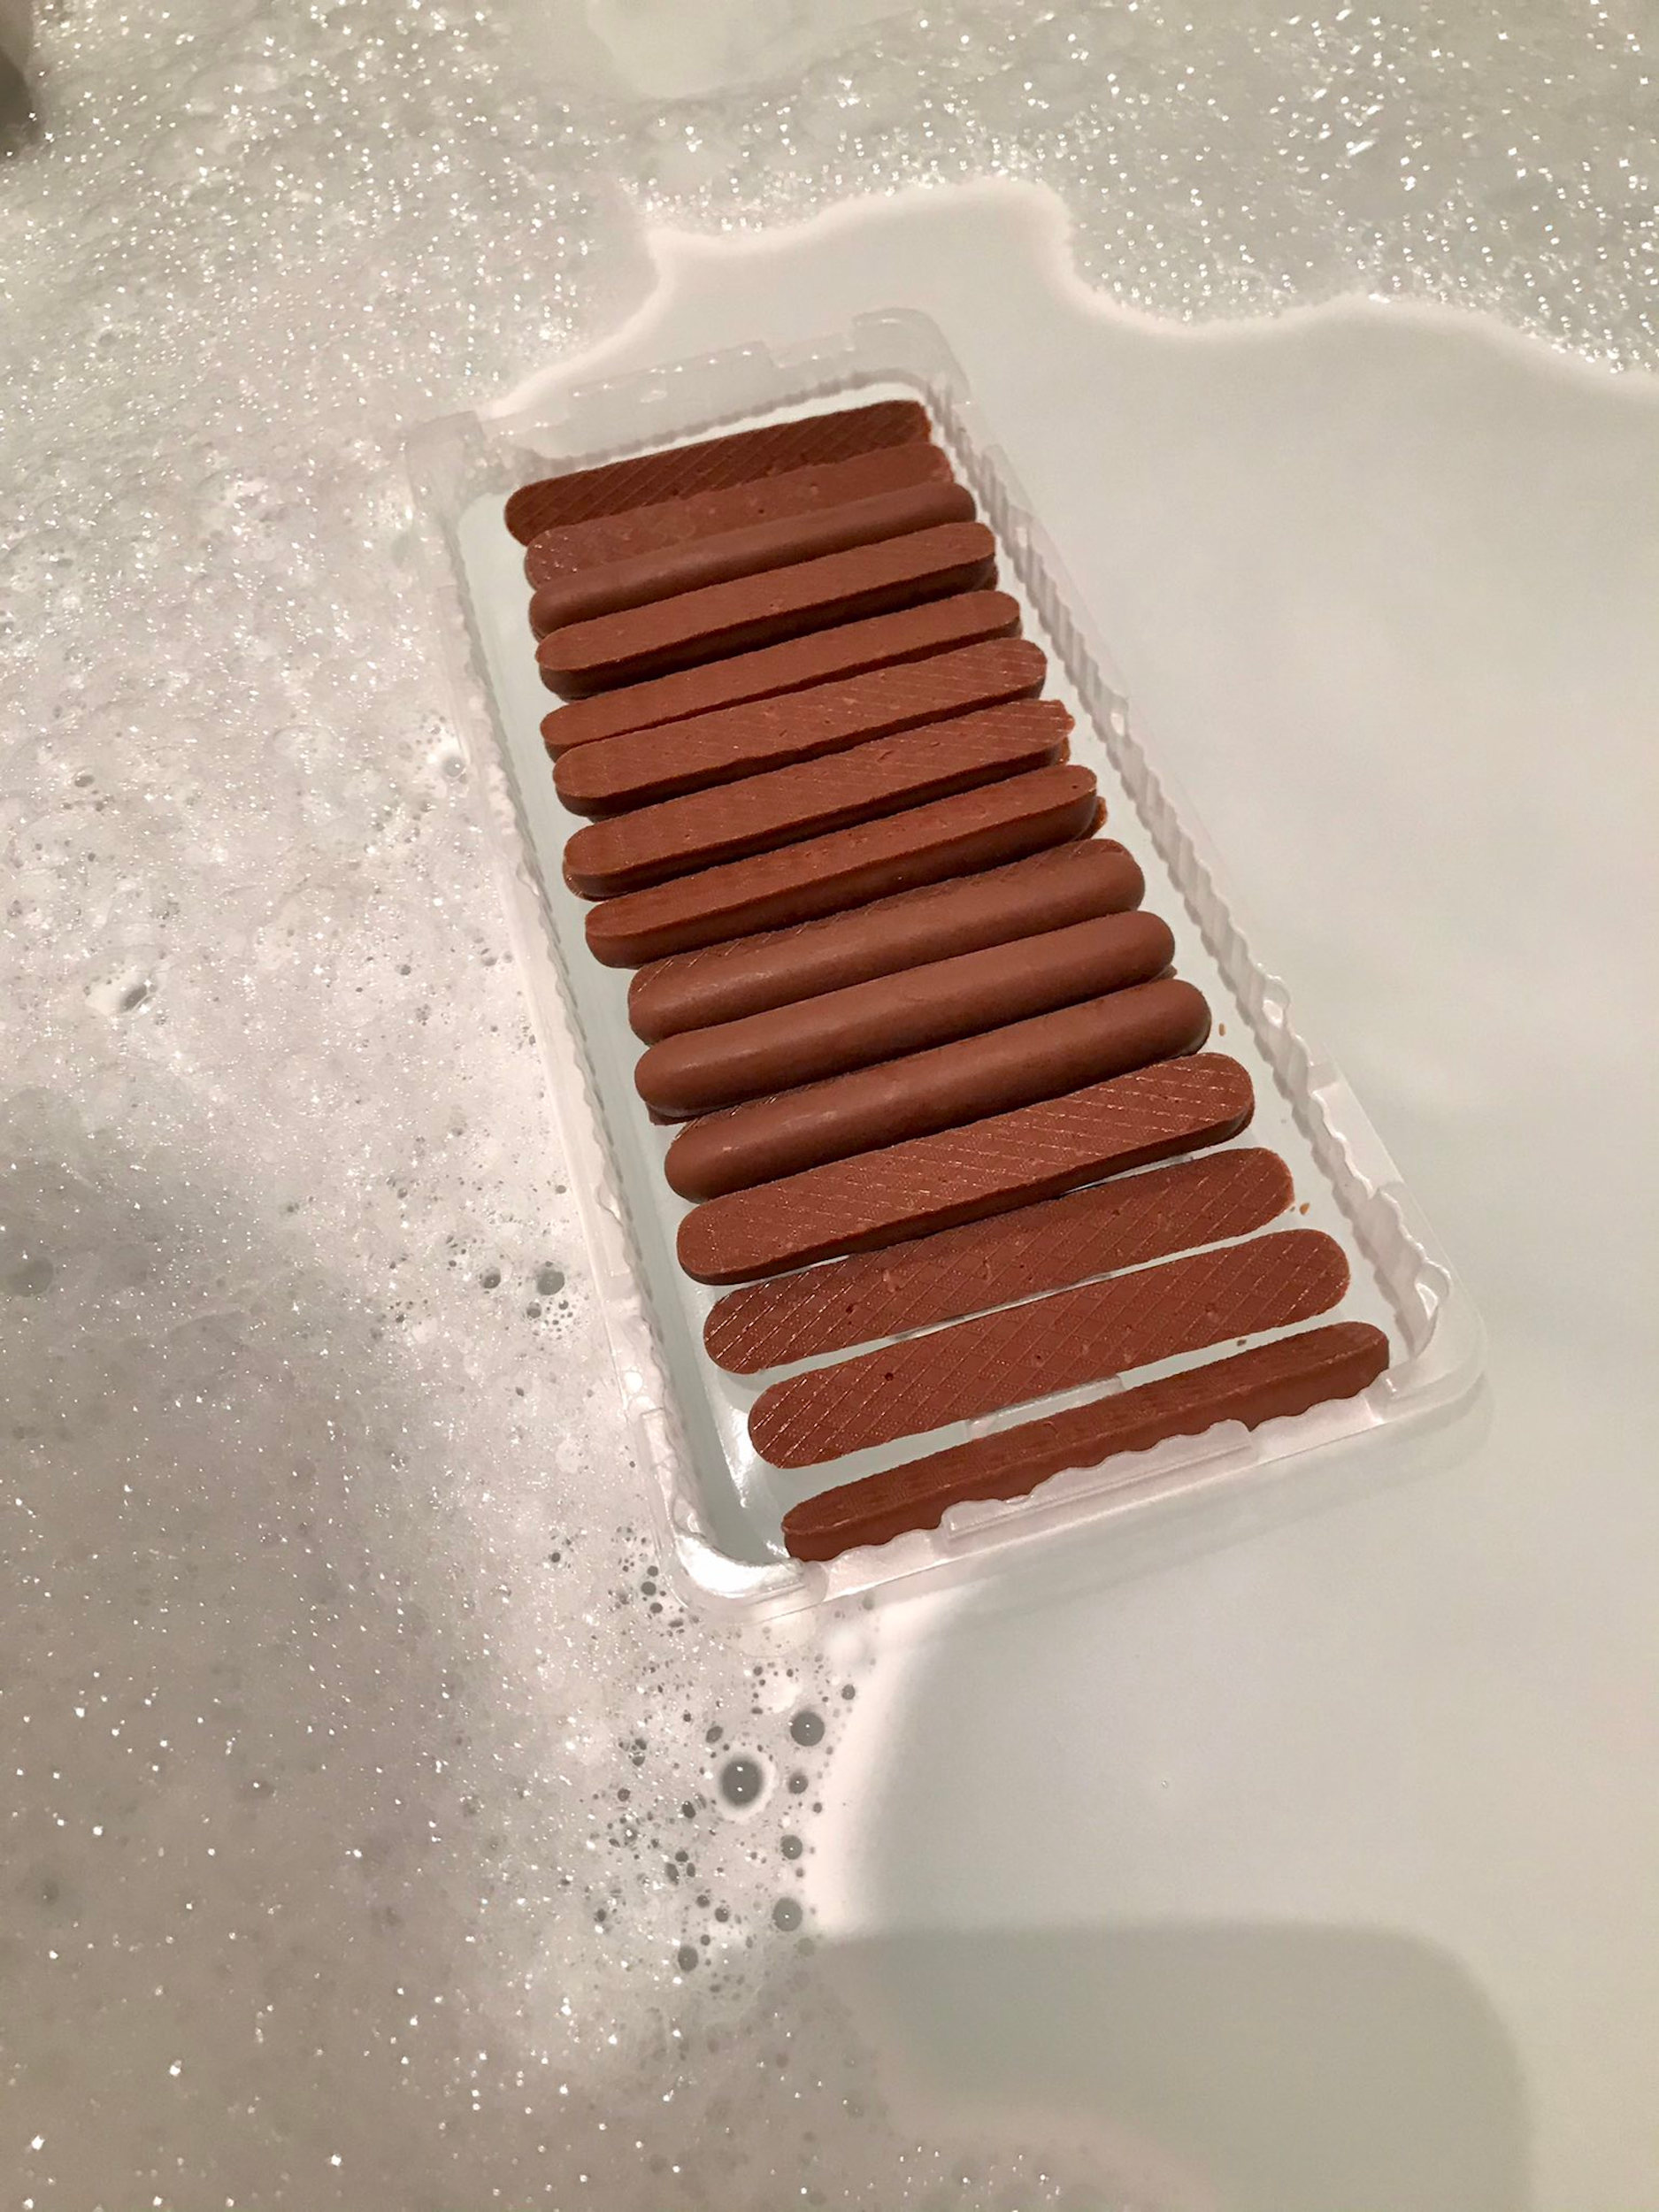 Chocolate fingers float in bath - Viral News